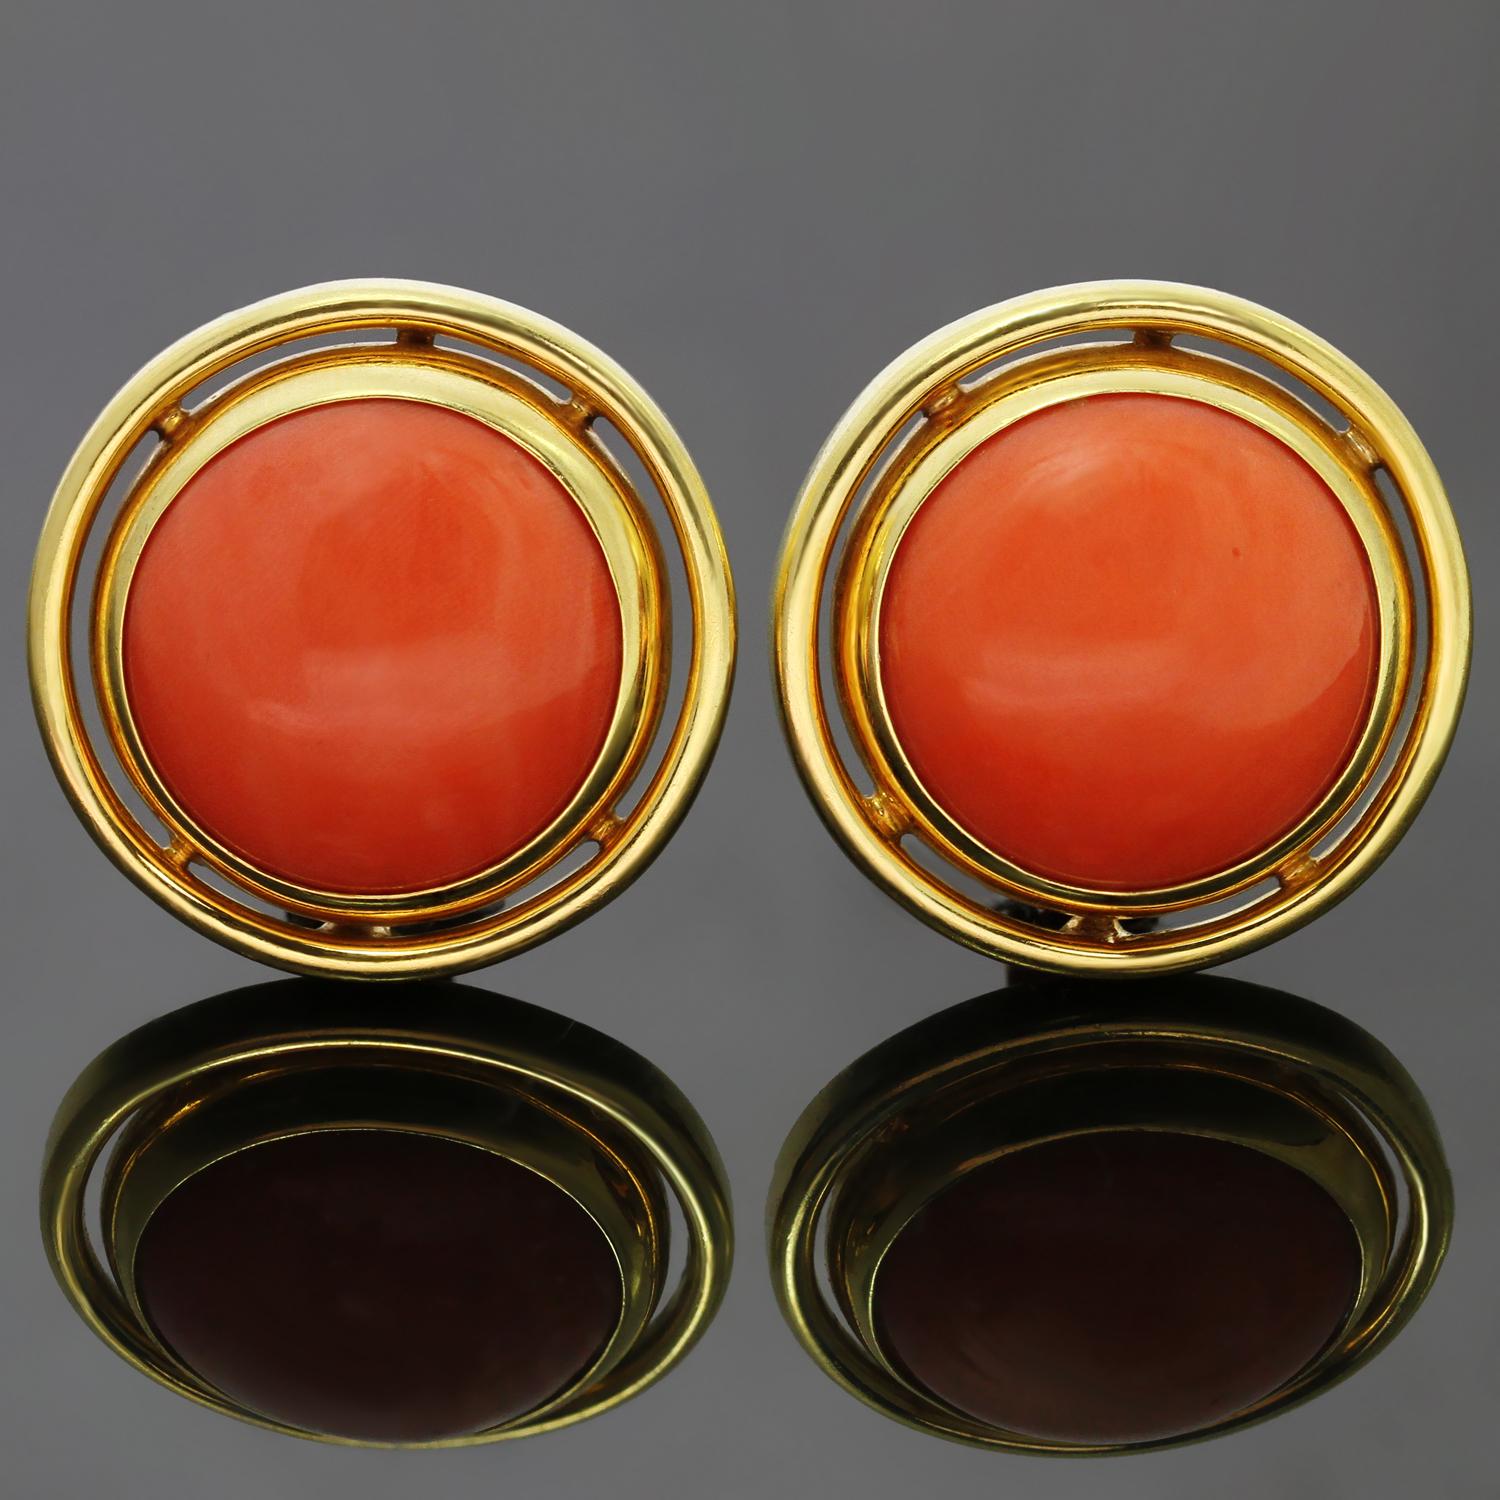 These stunning large round earrings are crafted in 18k yellow gold and feature beautiful even color cabochon red corals measuring 18.40mm x 11.30mm and 18.15mm x 10.85mm. These lever-back clip-on earrings are made for non-pierced ears and we can add